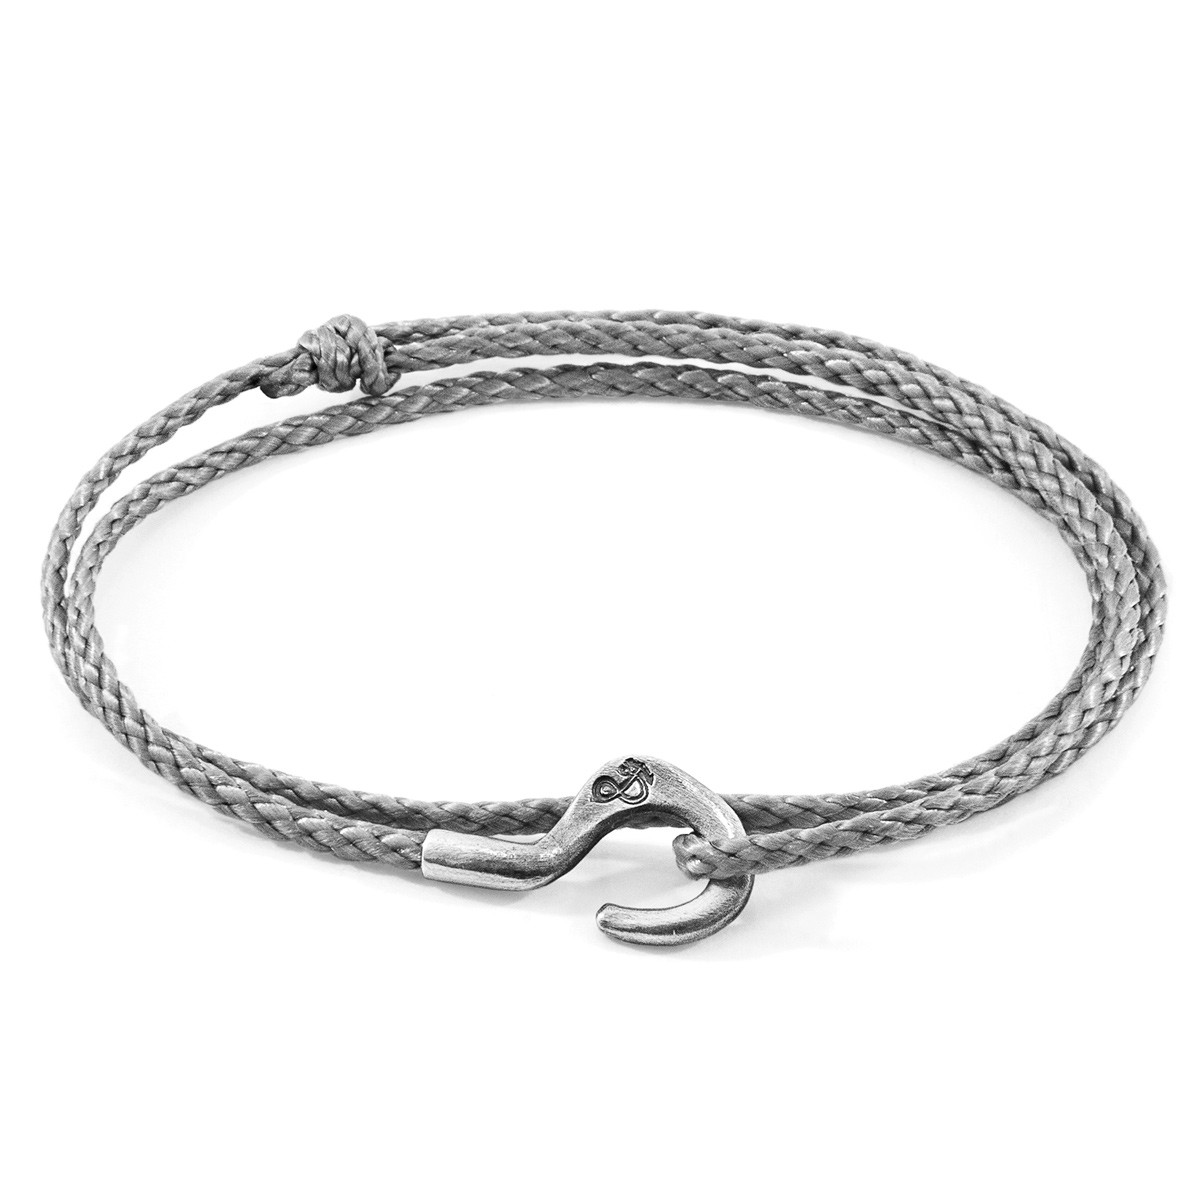 Anchor & Crew Classic Grey Charles Silver and Rope SKINNY Bracelet